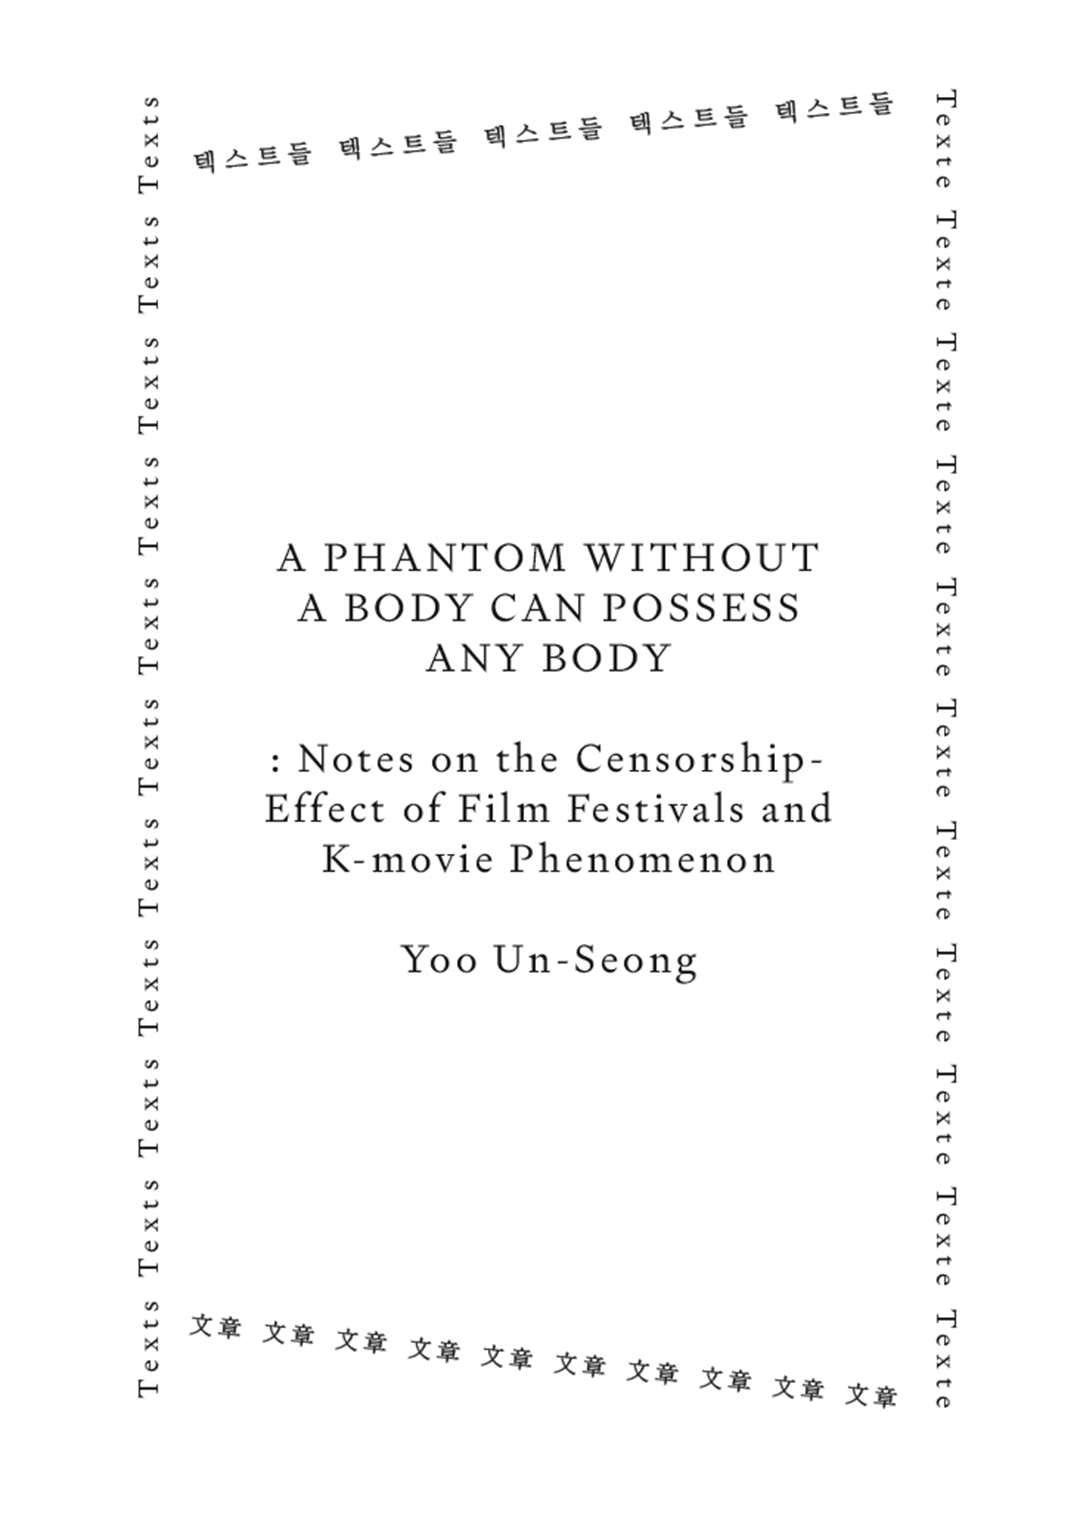 A PHANTOM WITHOUT A BODY CAN POSSESS ANY BODY : Notes on the Censorship-Effect of Film Festivals and K-movie Phenomenon